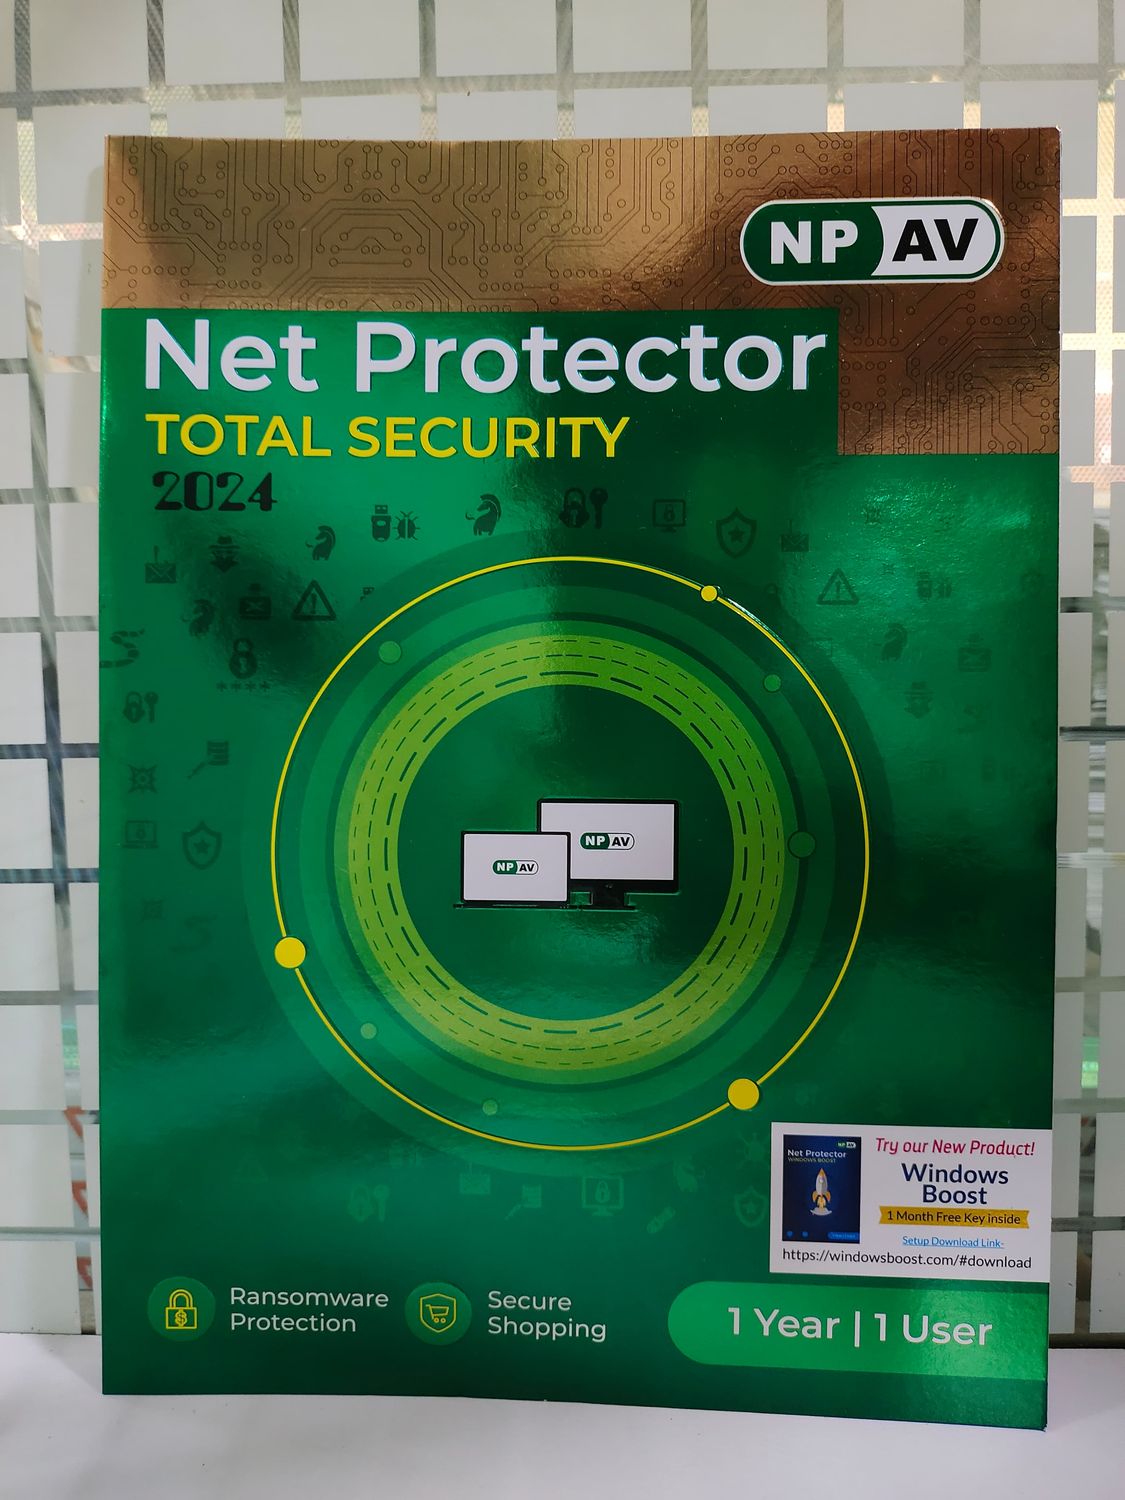 New, 1 User, 1 Year, Net Protector Total Security